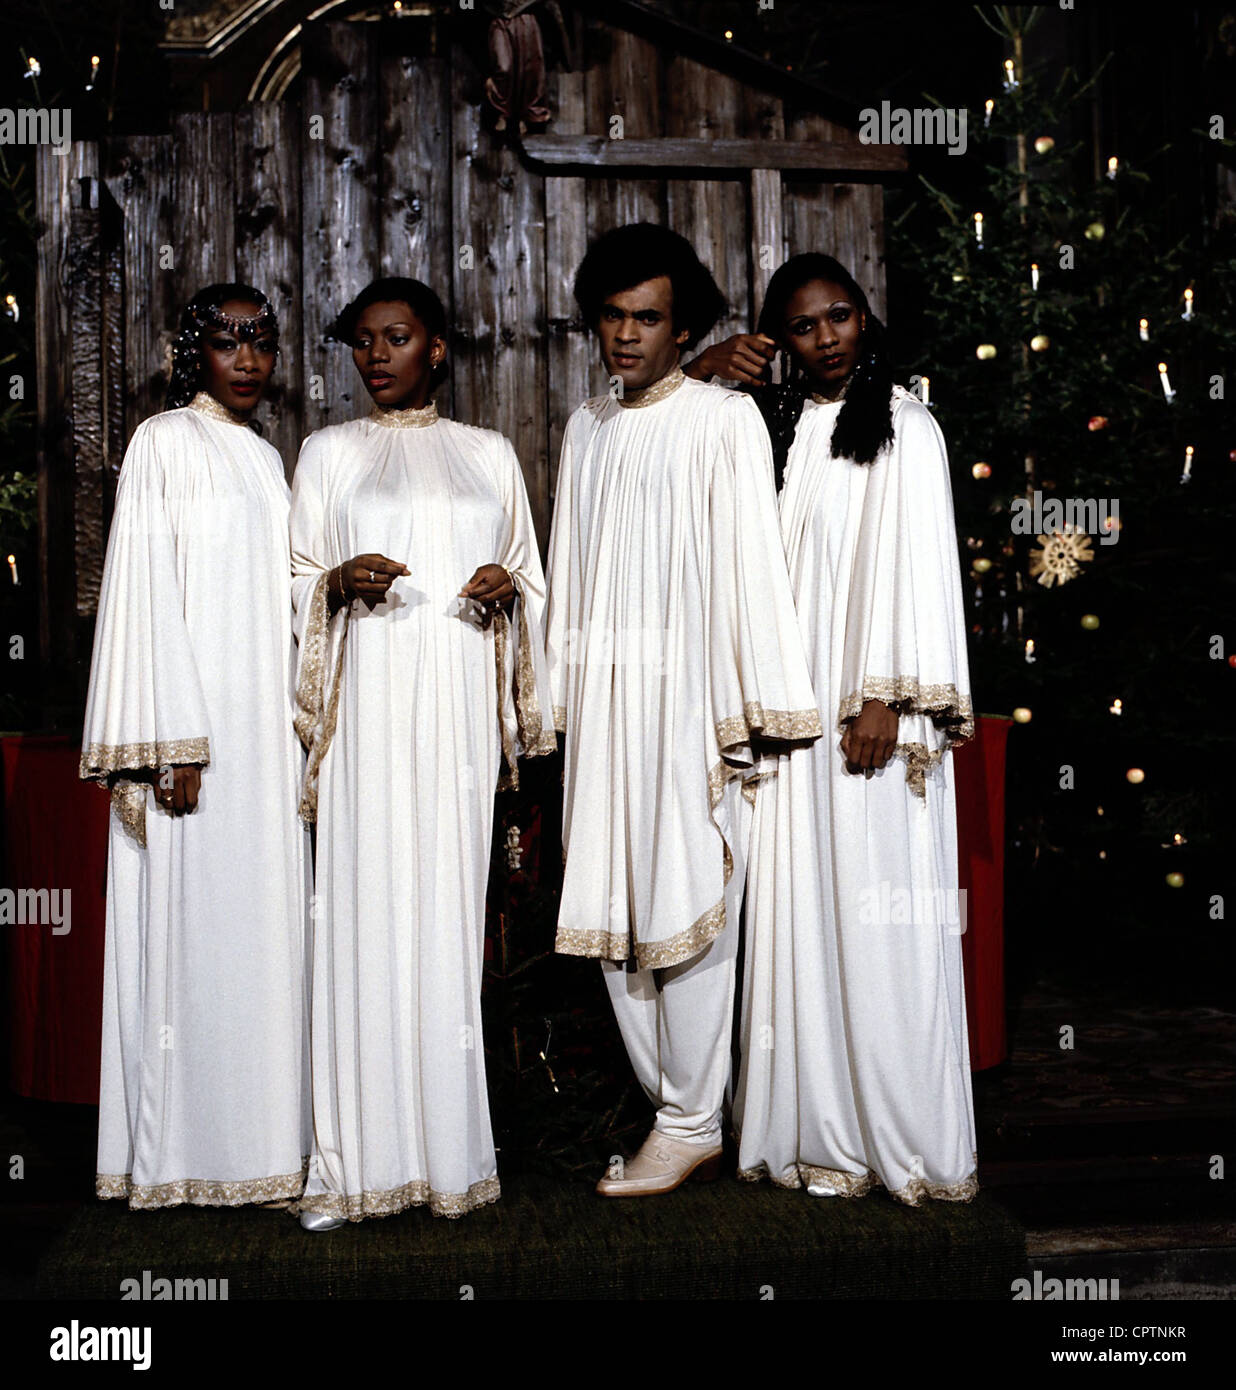 Boney M., music group, founded in 1976, group picture, 1970s, Stock Photo